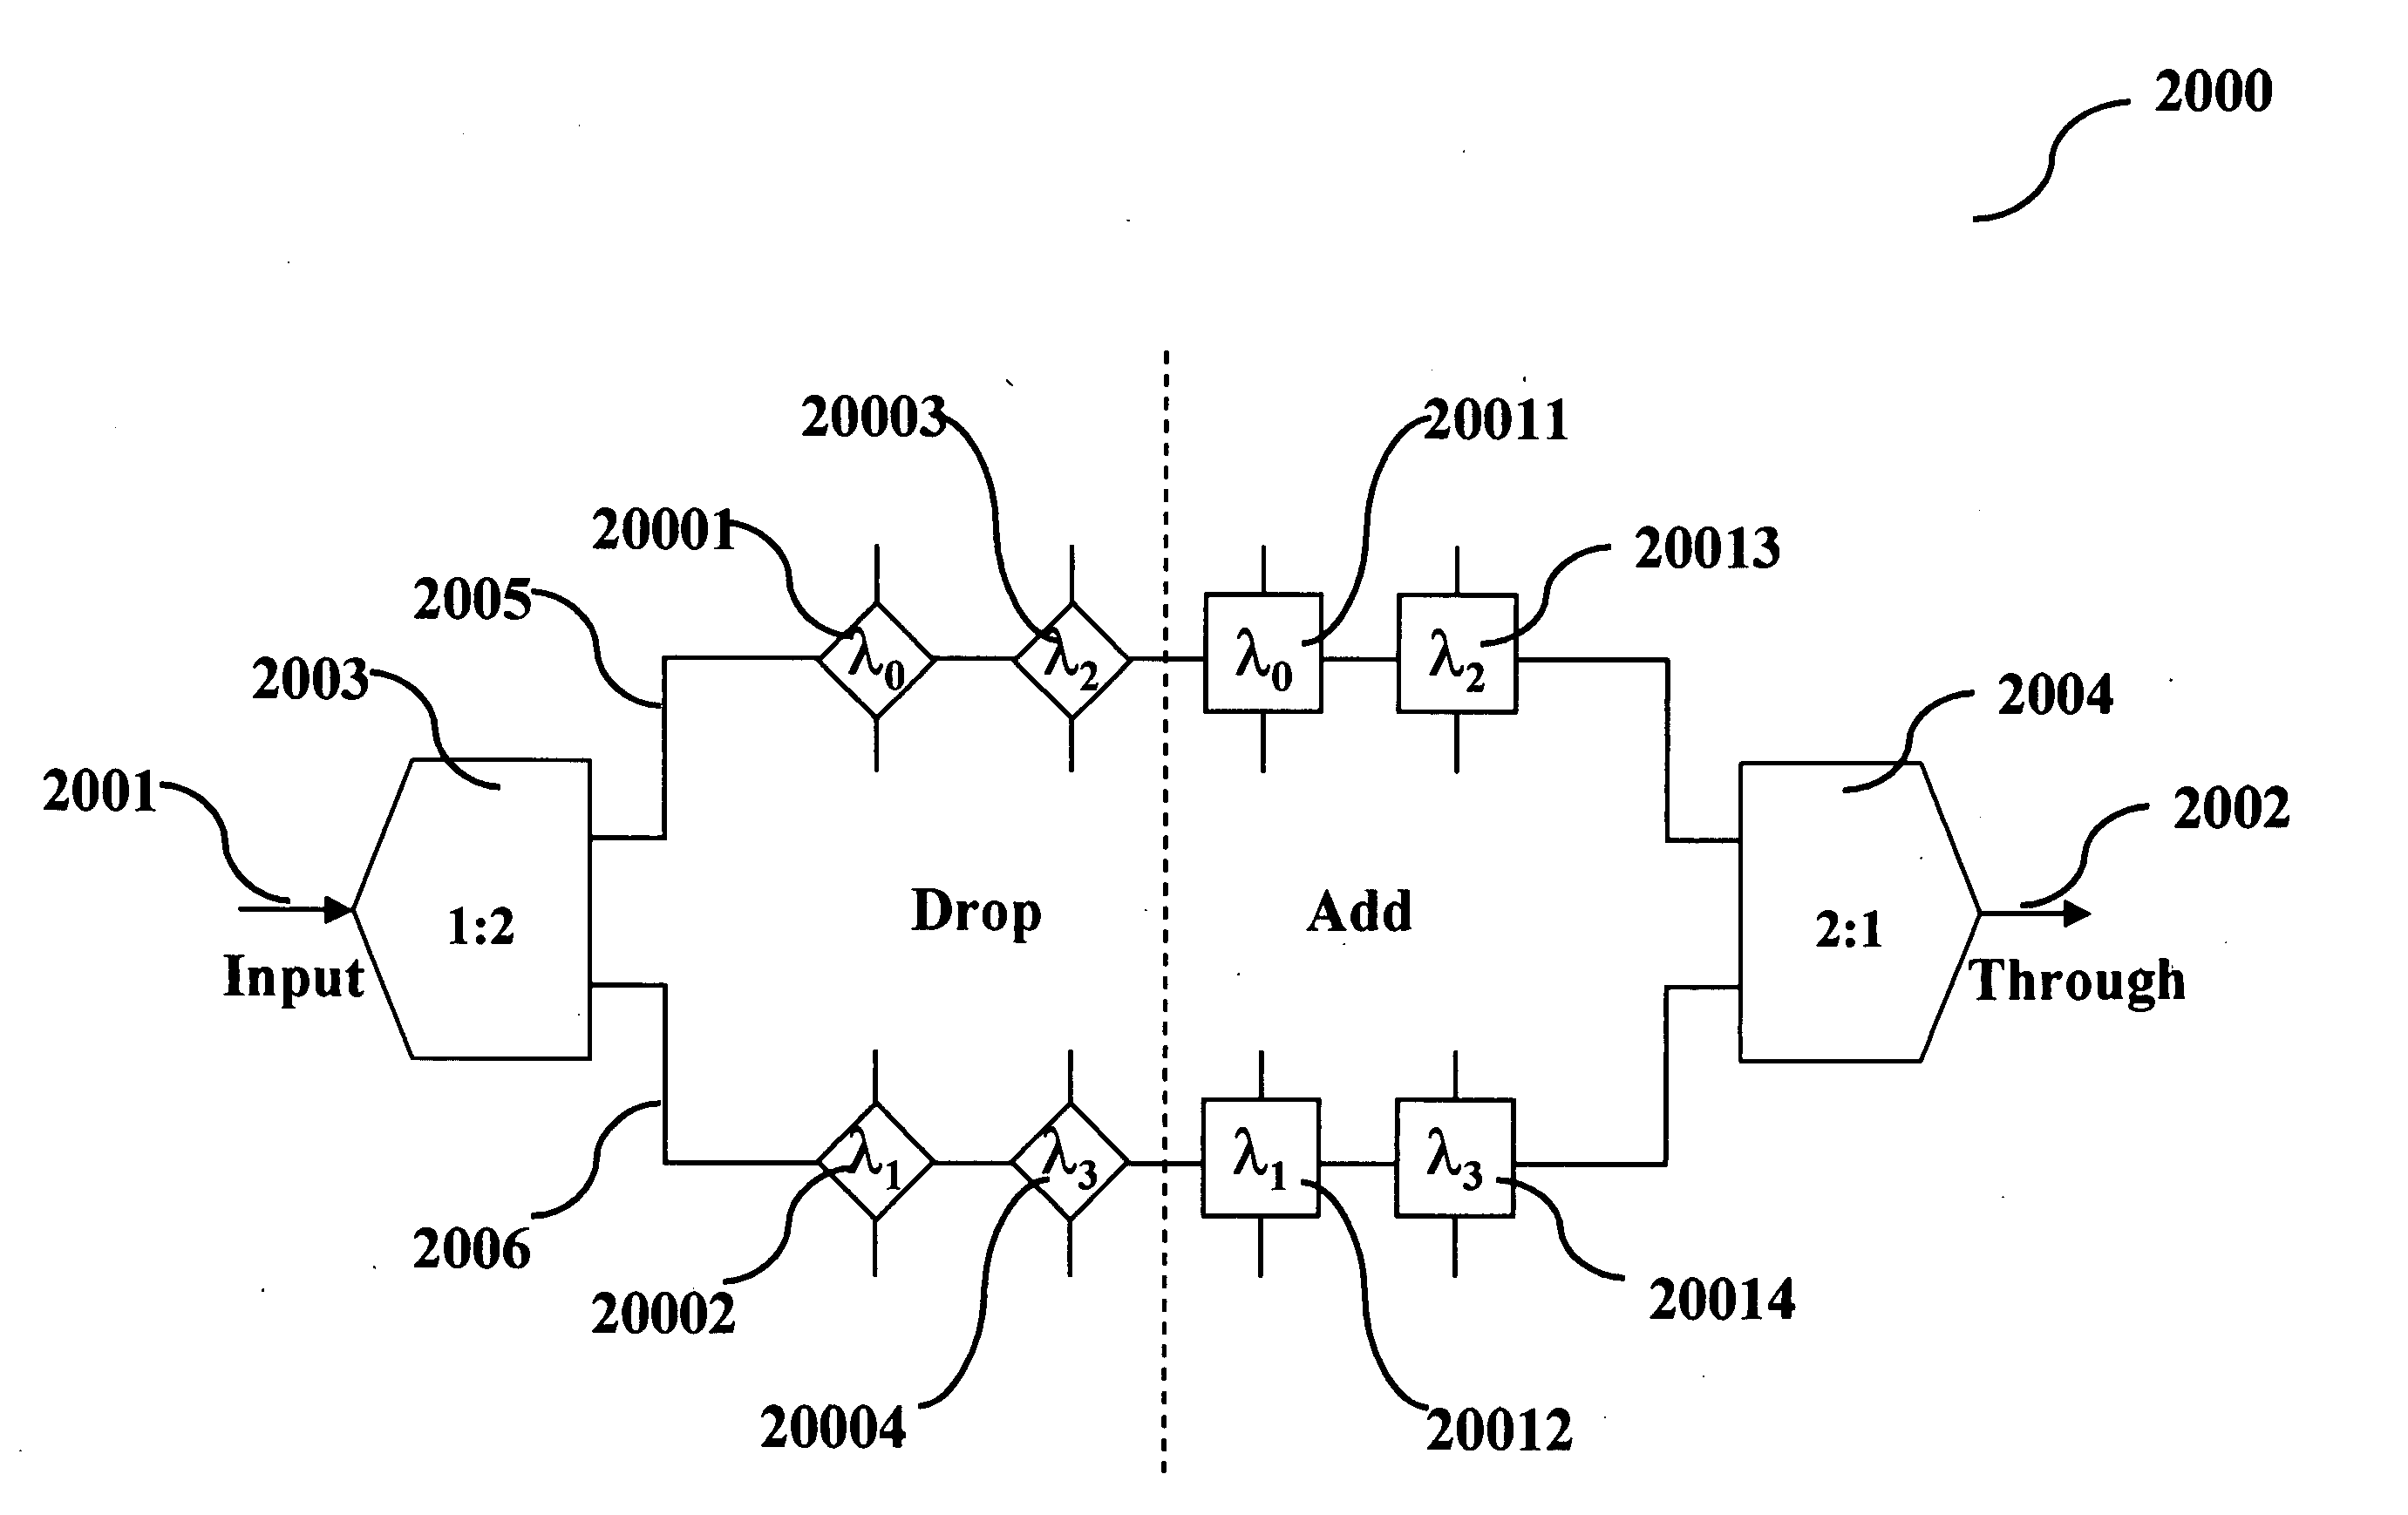 Wavelength division multiplexing add/drop system employing optical switches and interleavers